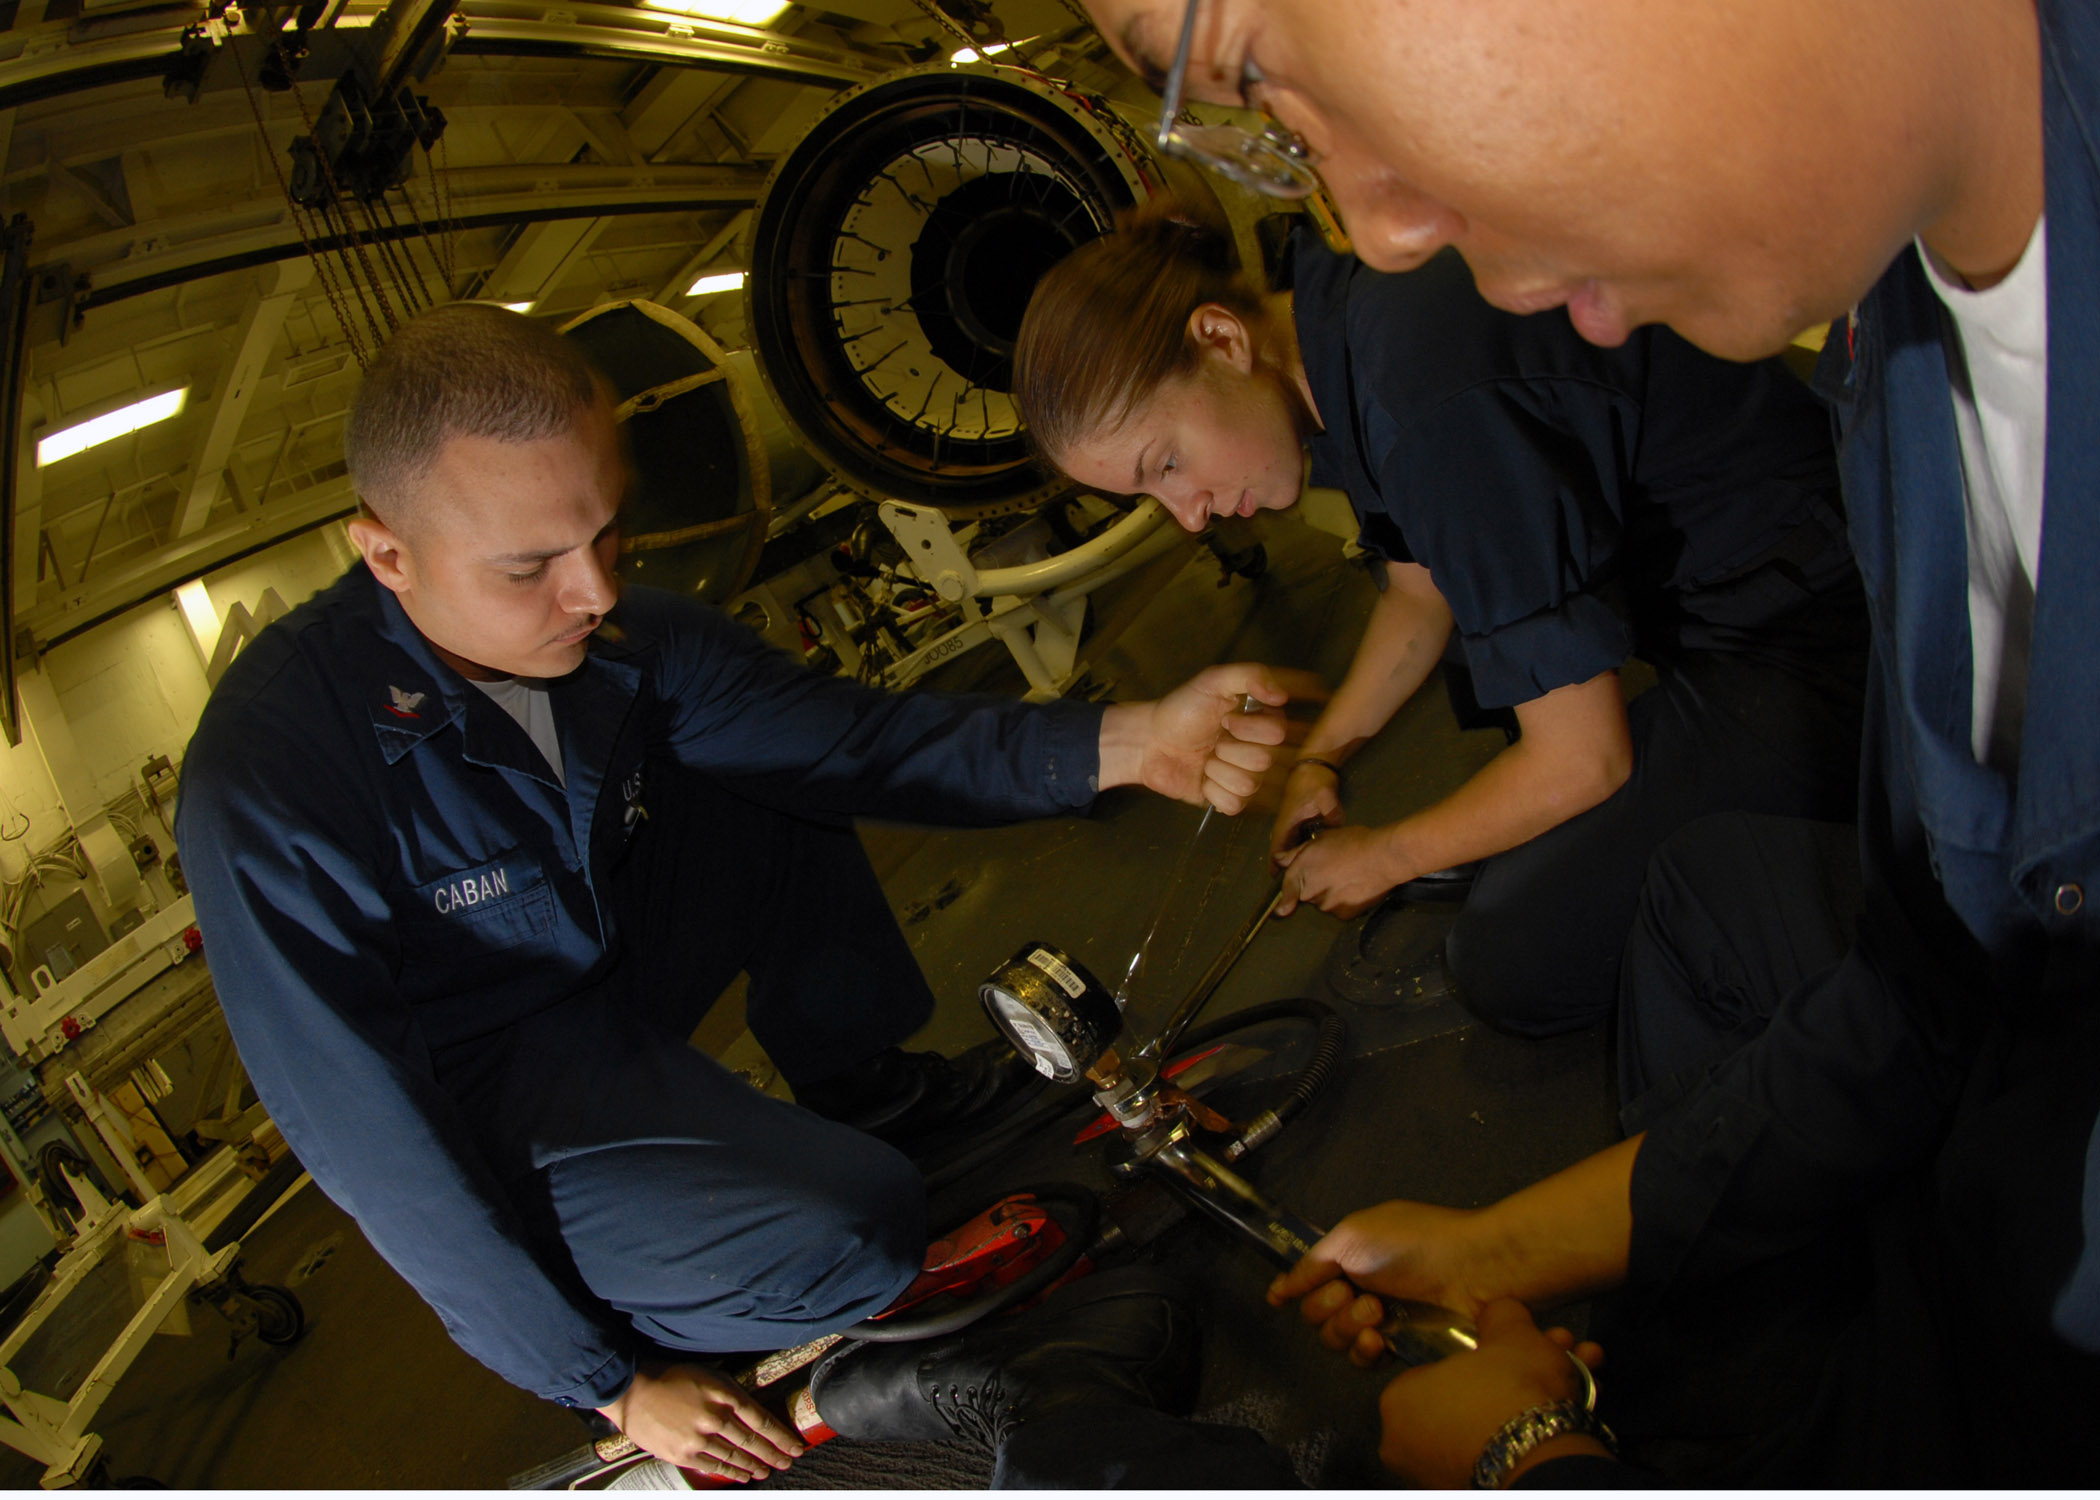 US Navy 070808-N-2910W-001 Sailors use wrenches to calibrate pressure valve to the turbine from a hydraulic pump in the Jet Shop aboard Nimitz-class aircraft carrier USS Abraham Lincoln (CVN 72)